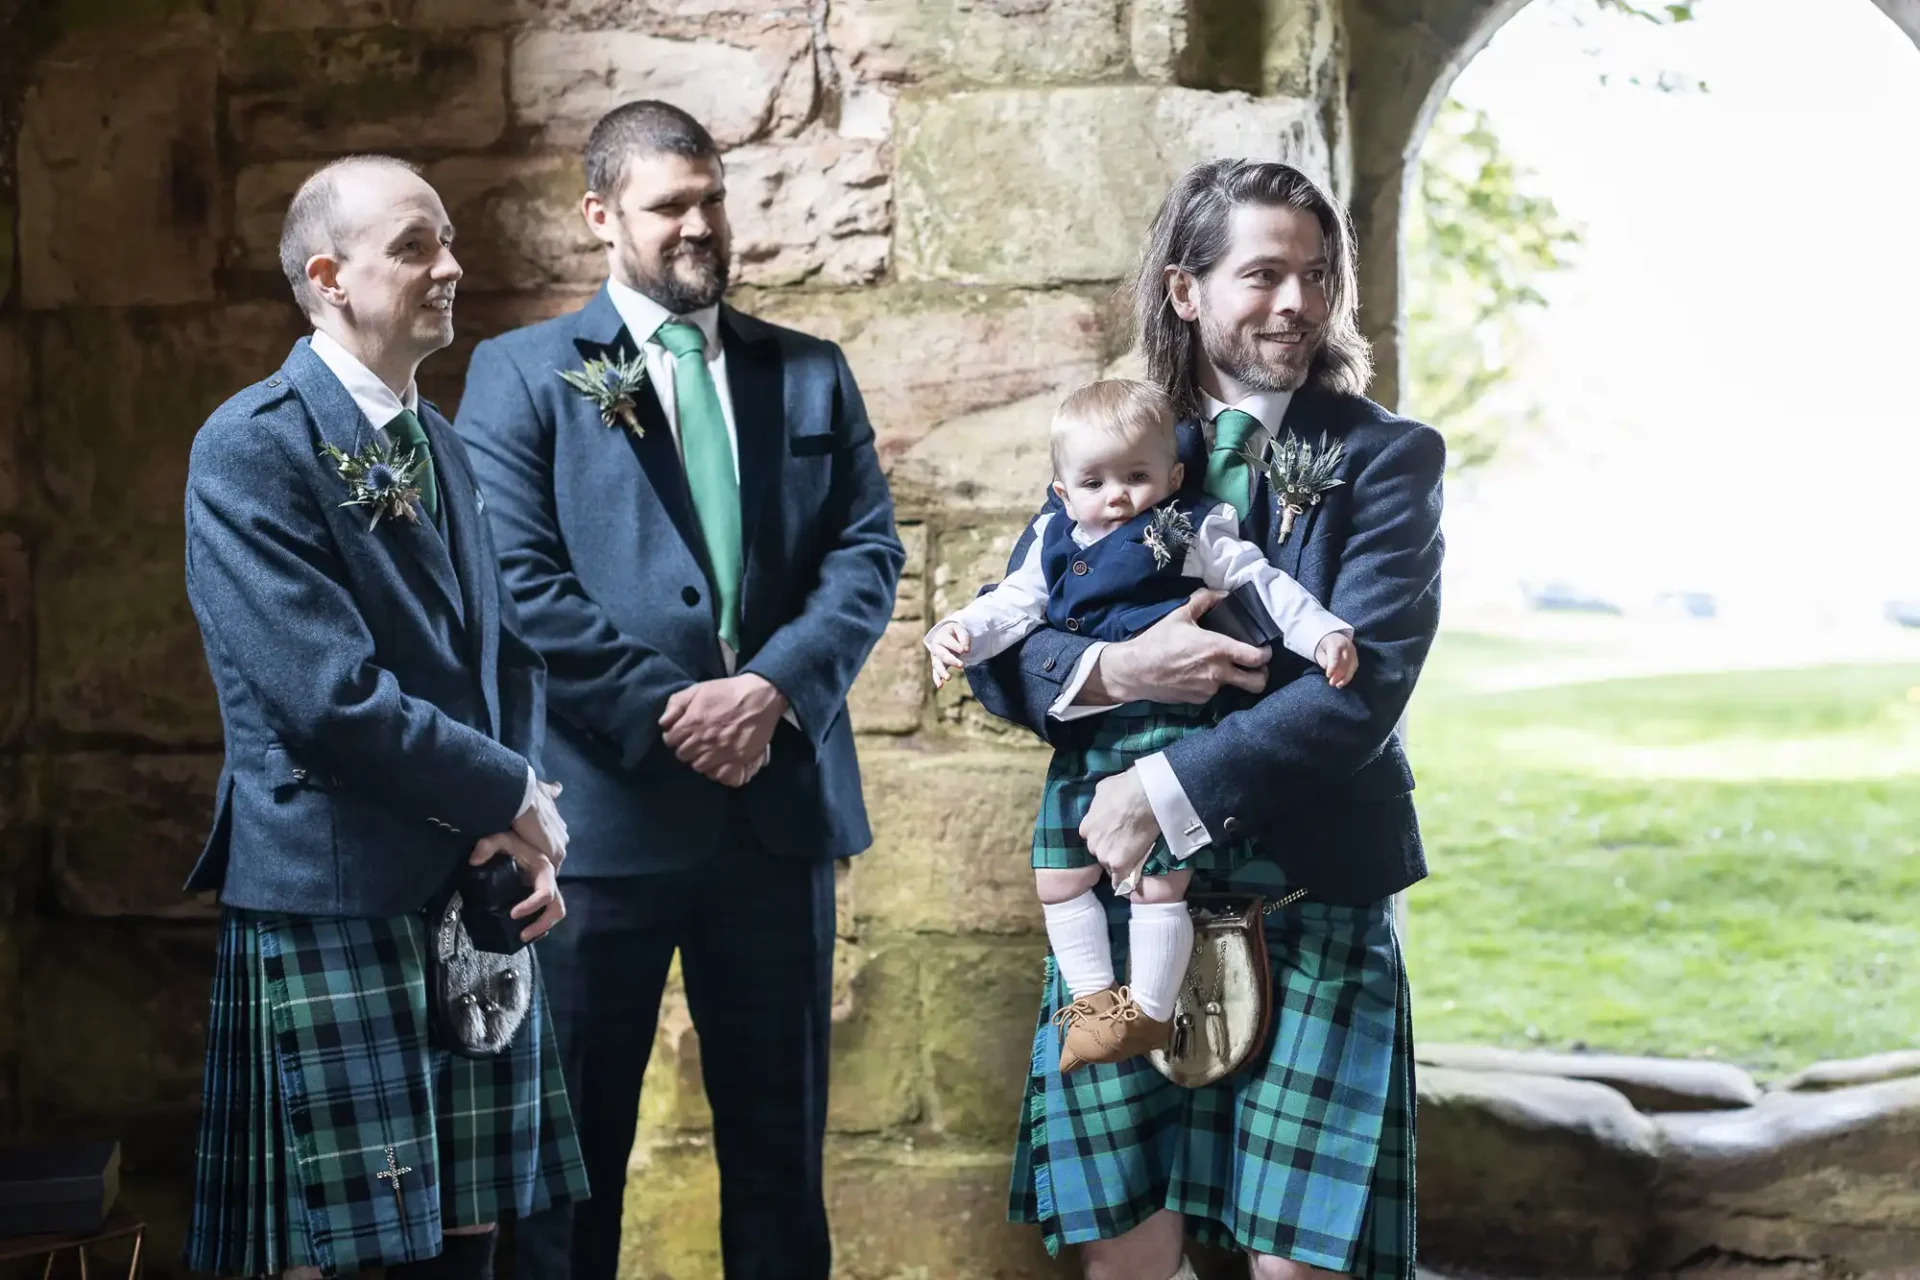 Three men wearing kilts stand near a stone wall. One man holds a baby, also dressed in a kilt. They appear to be outdoors near an archway with greenery visible beyond.